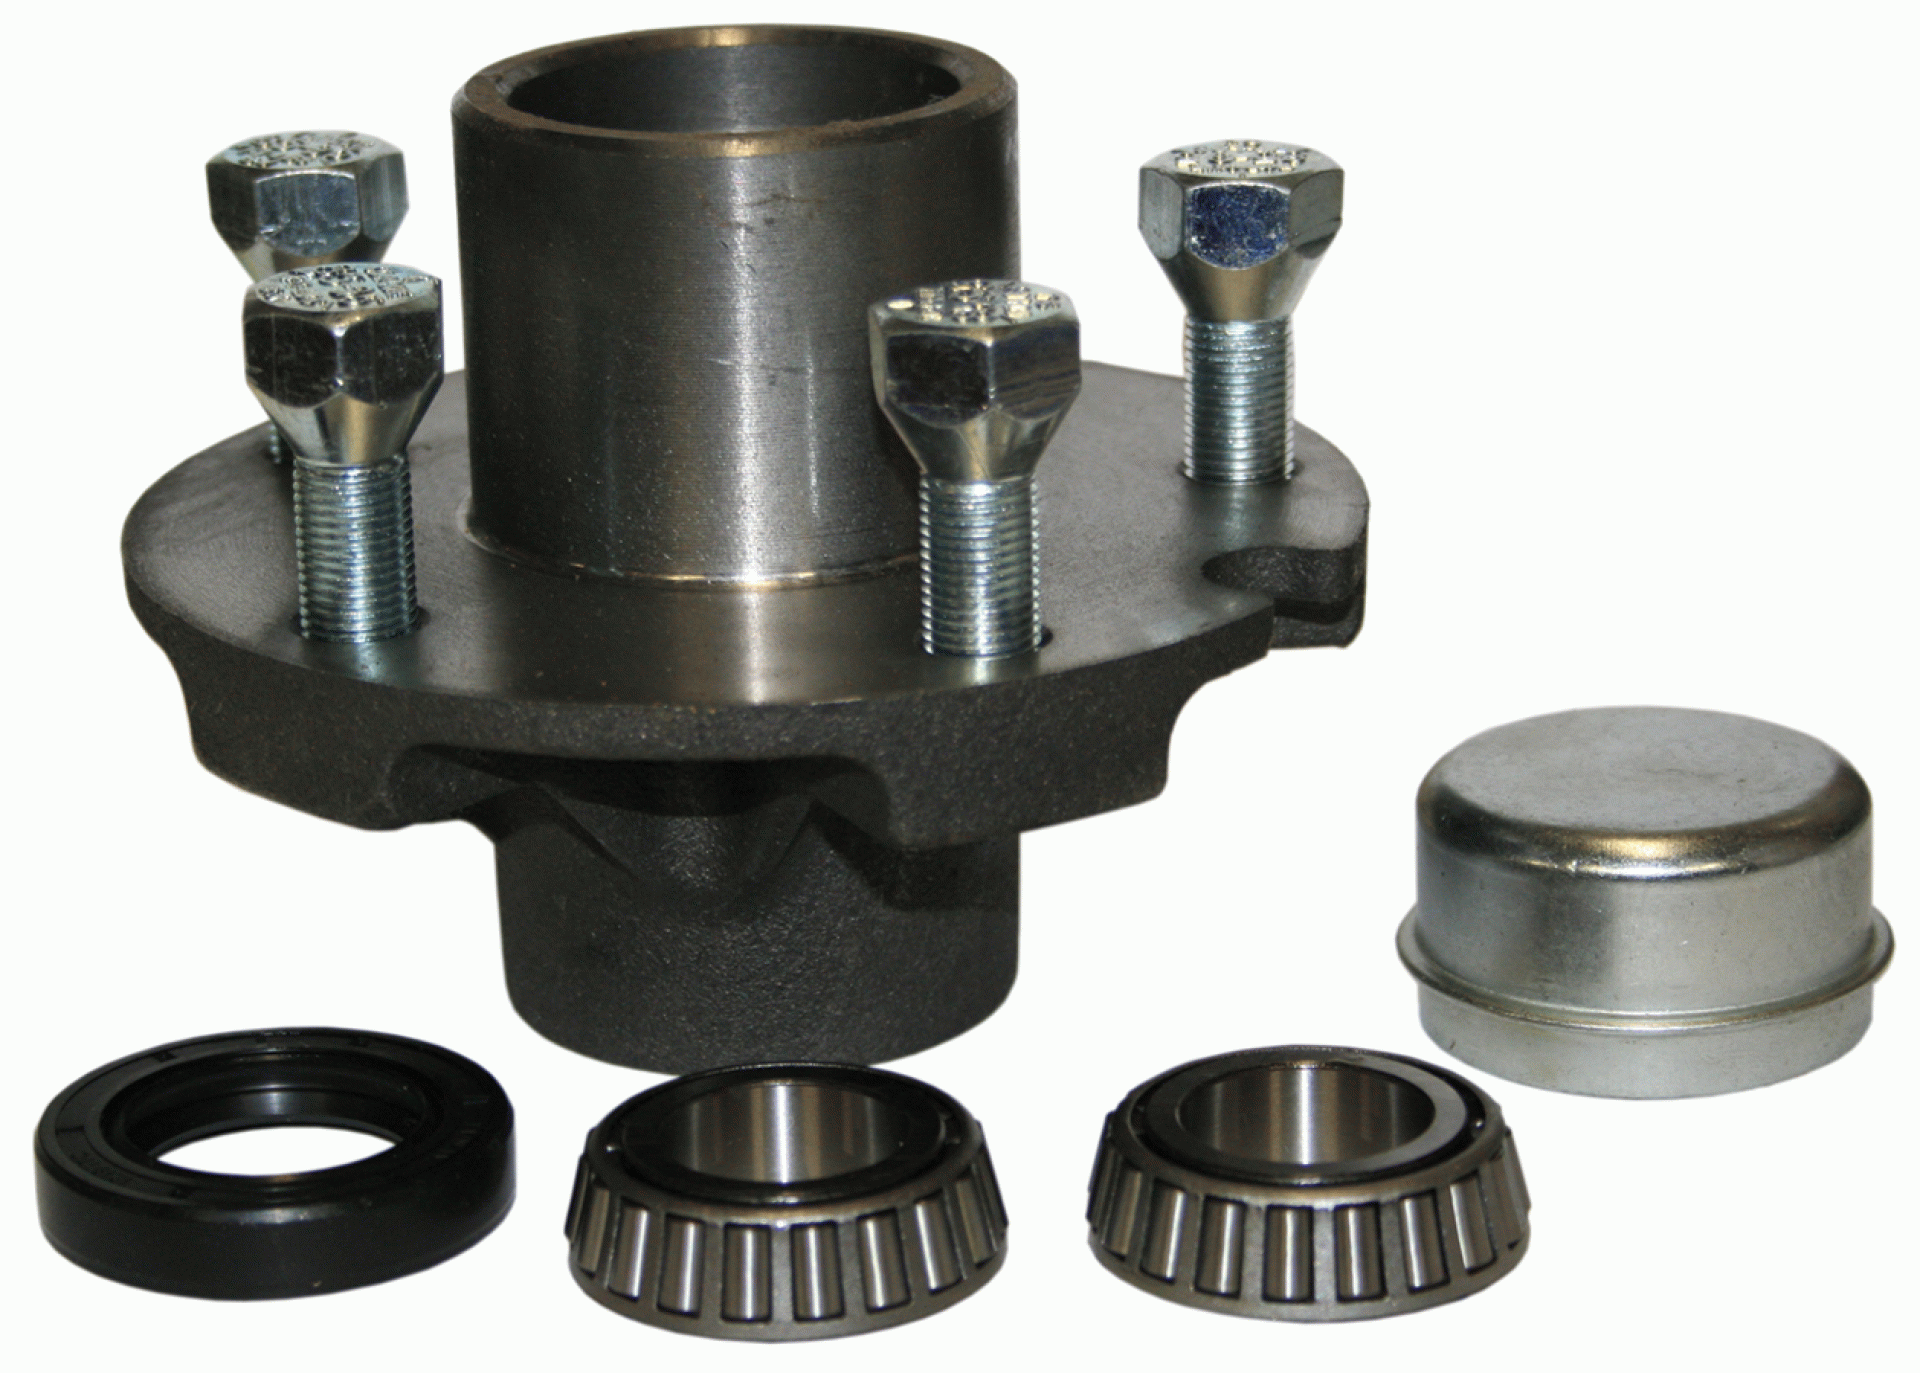 DEXTER MARINE PRODUCTS OF GEORGIA LC | 81052 | HUB ASSEMBLY COMPLETE 1" BEARING 4 LUG 1250 lb capacity